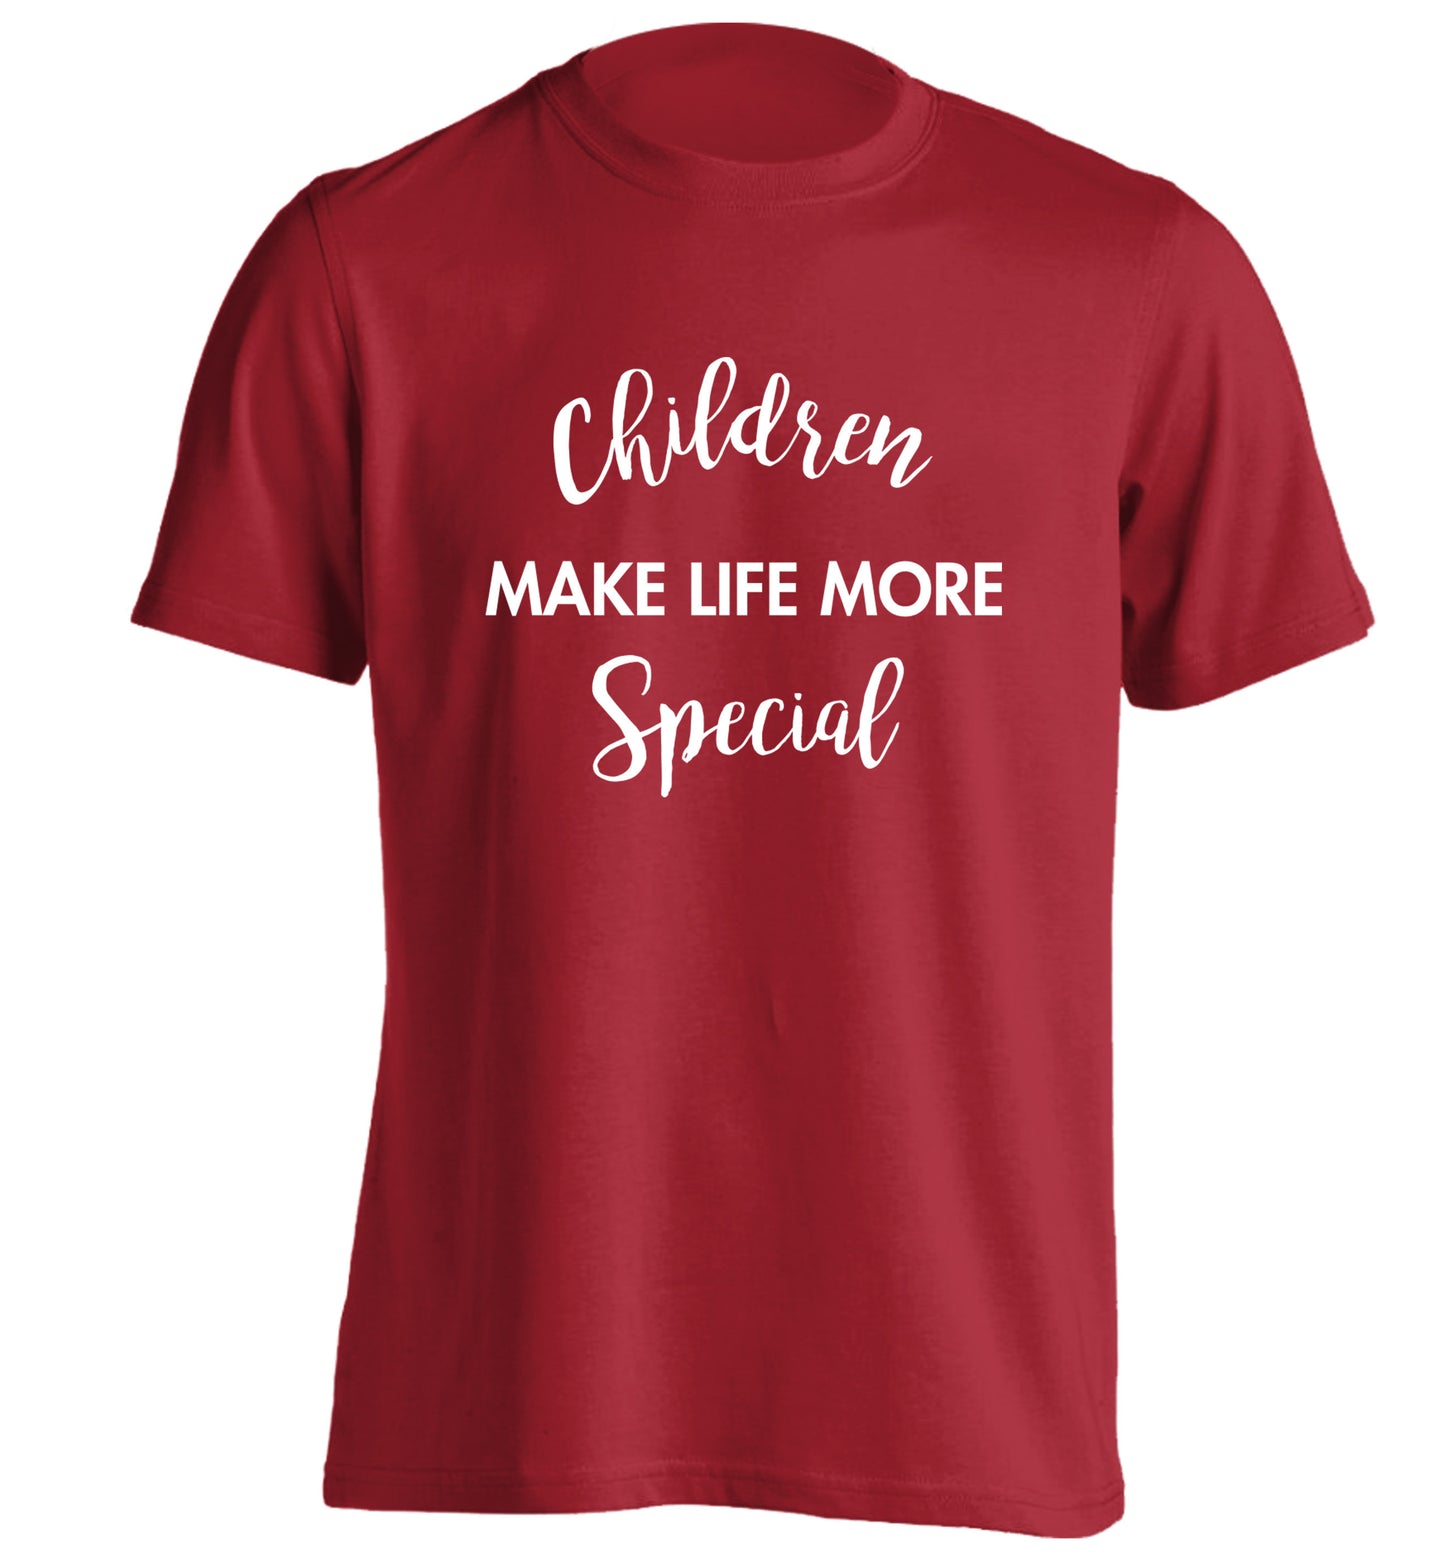 Children make life more special adults unisex red Tshirt 2XL